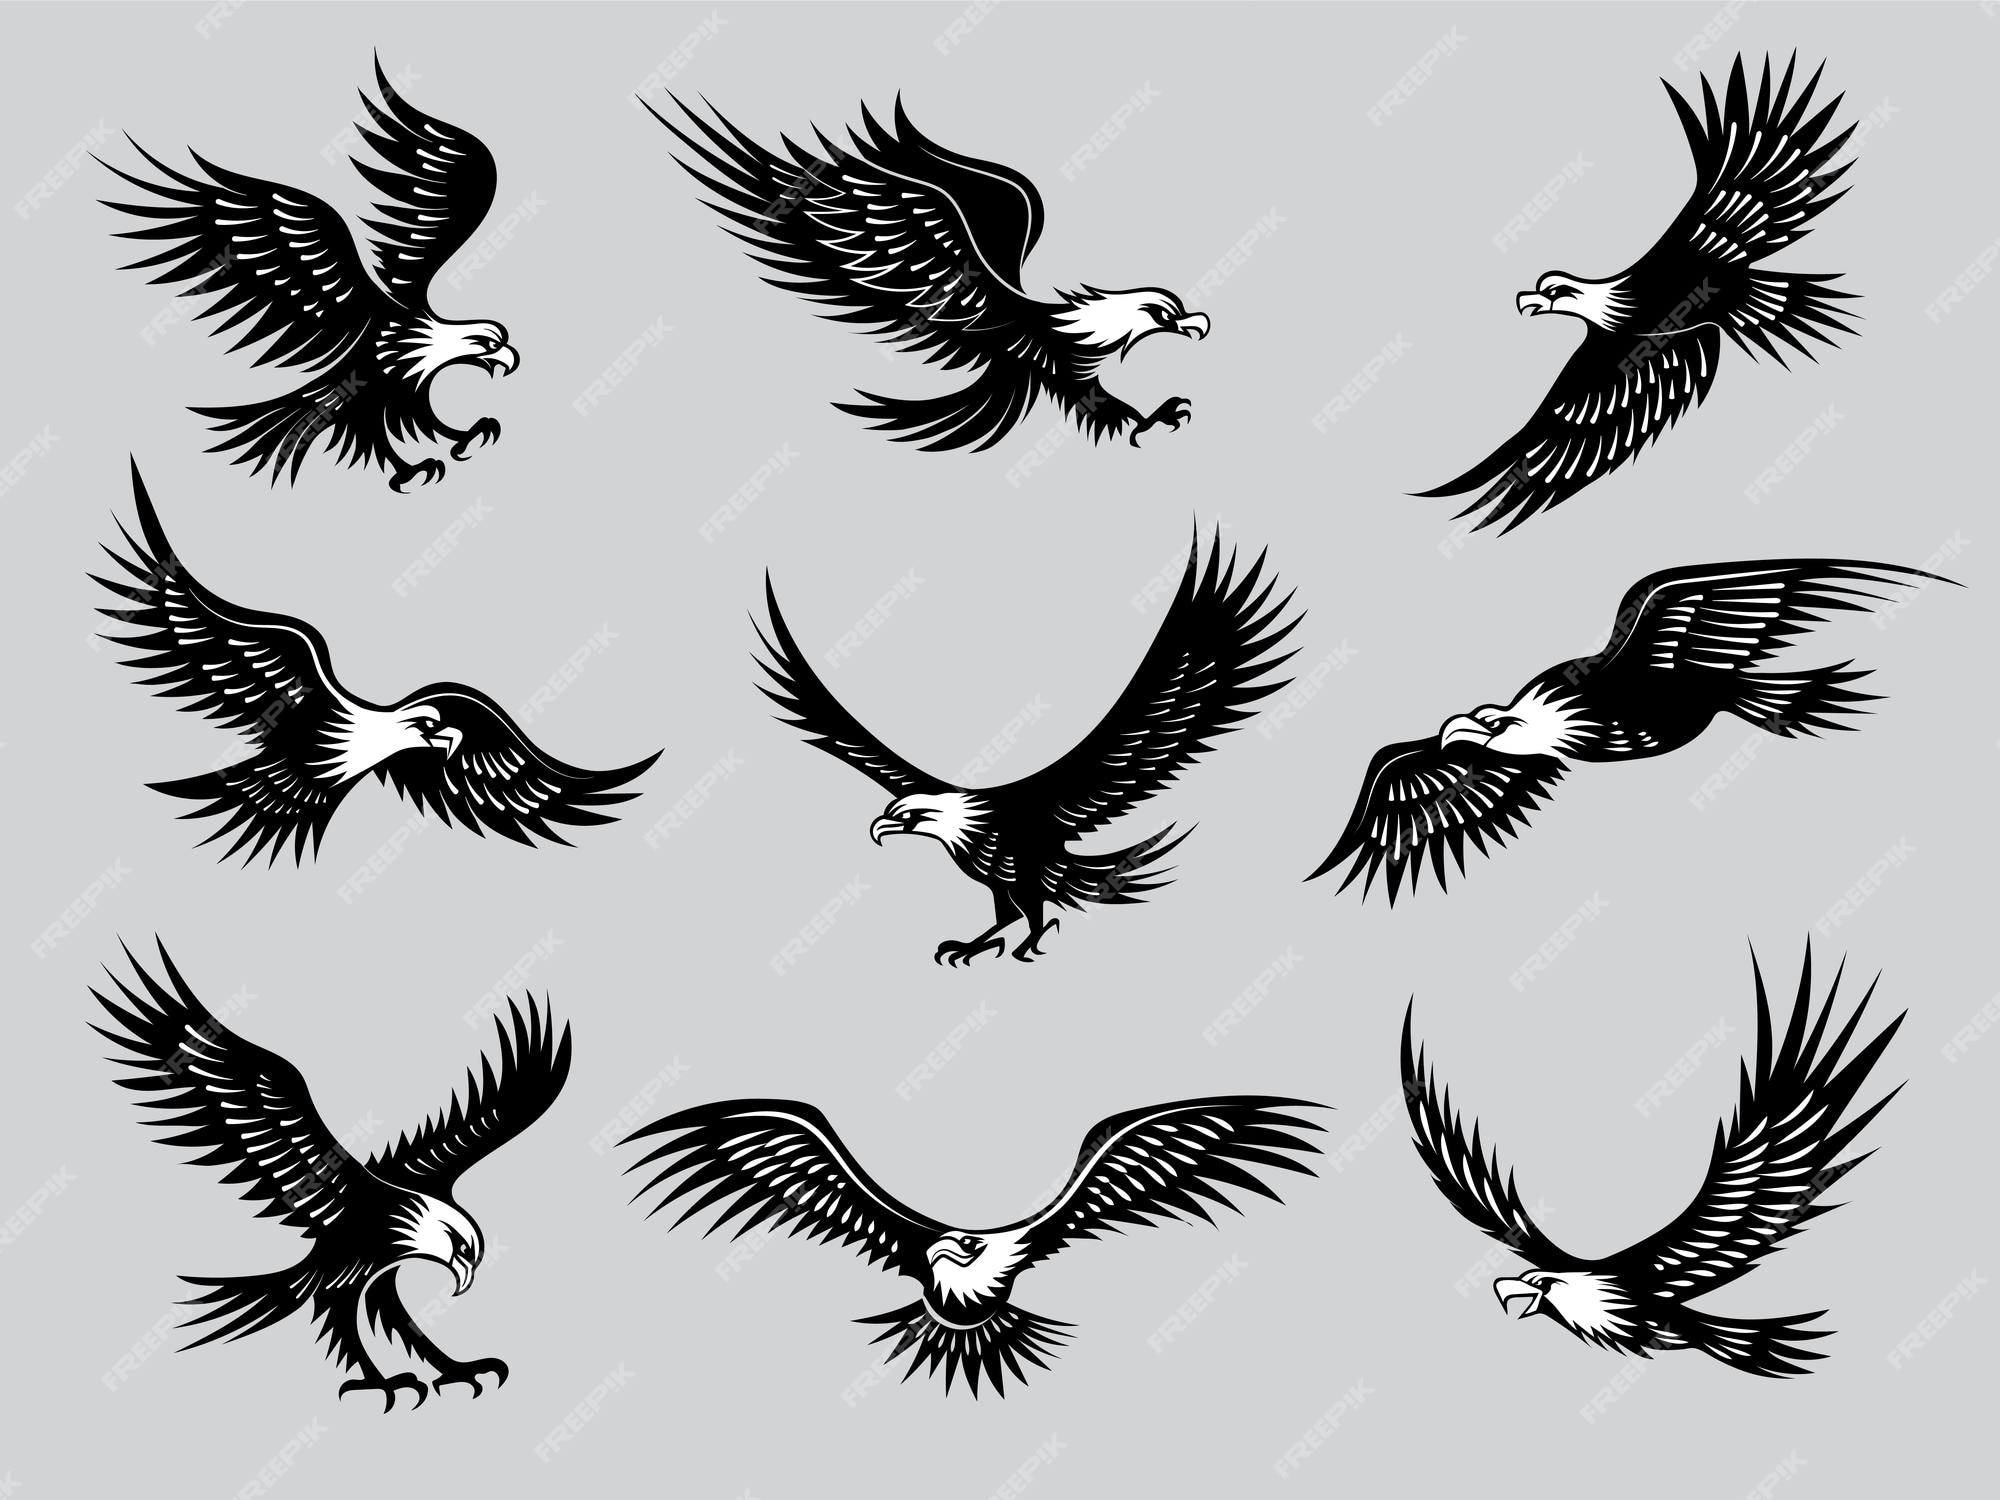 10. Eagle and Moon Tattoo for Women - wide 9